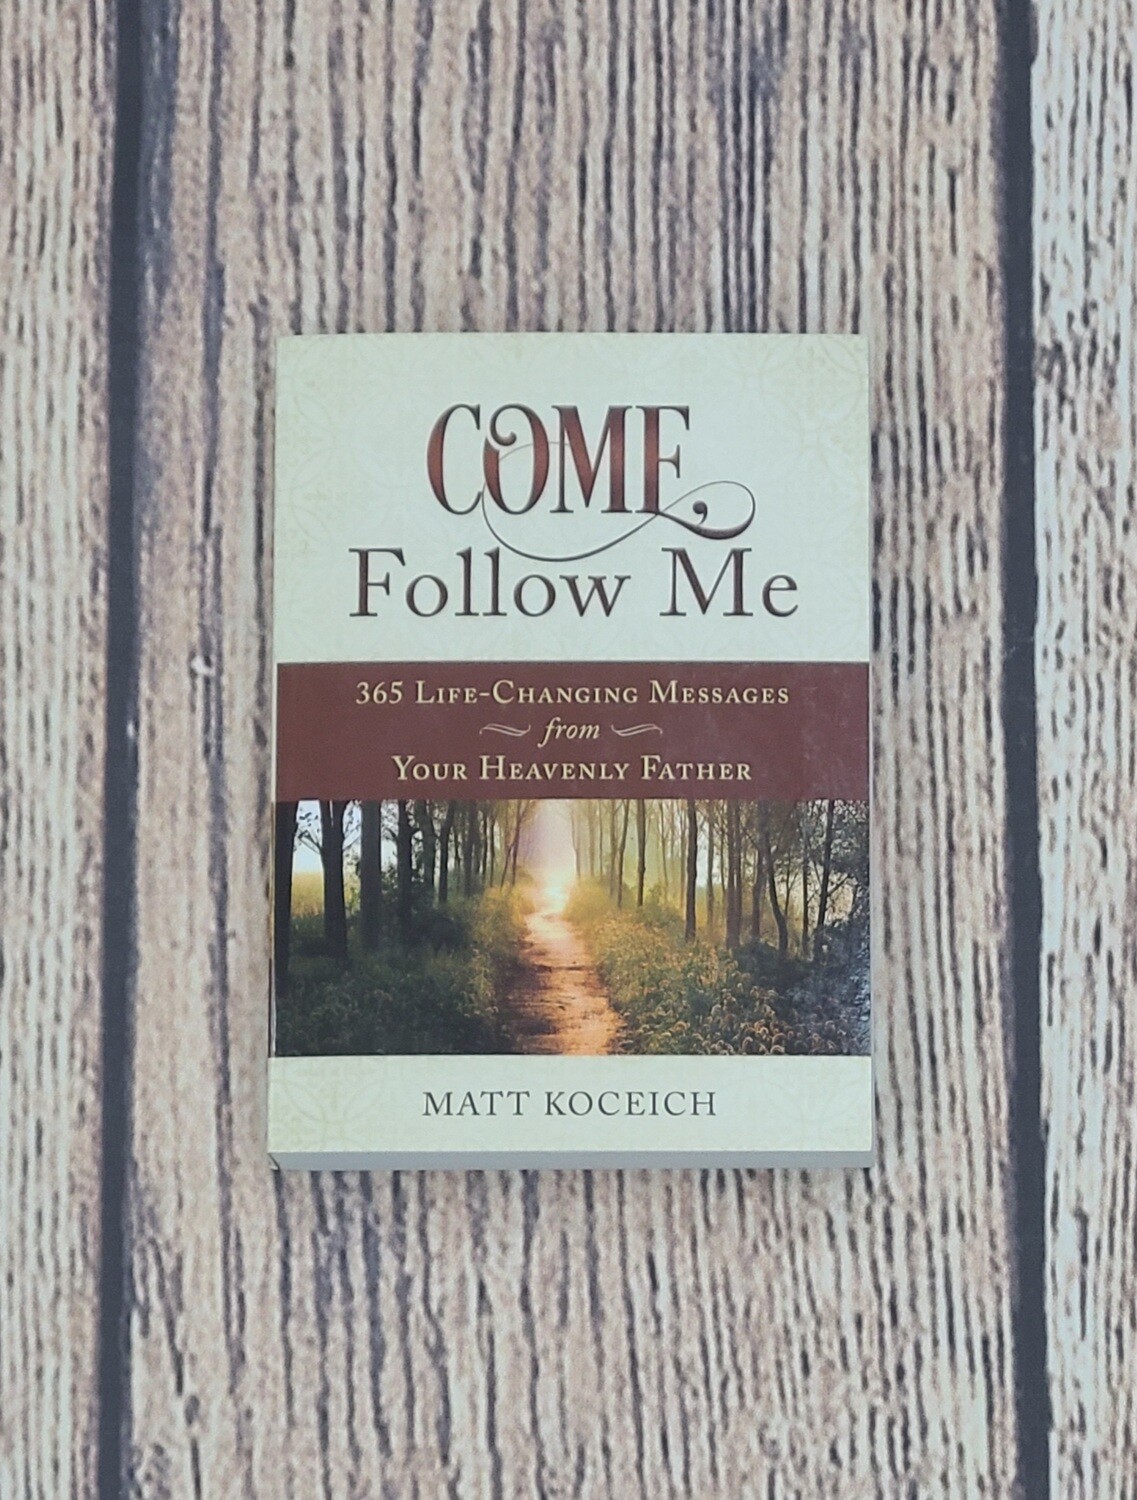 Come, Follow Me: 365 Life -Changing Messages from Your Heavenly Father by Matt Koceich - Great Condition